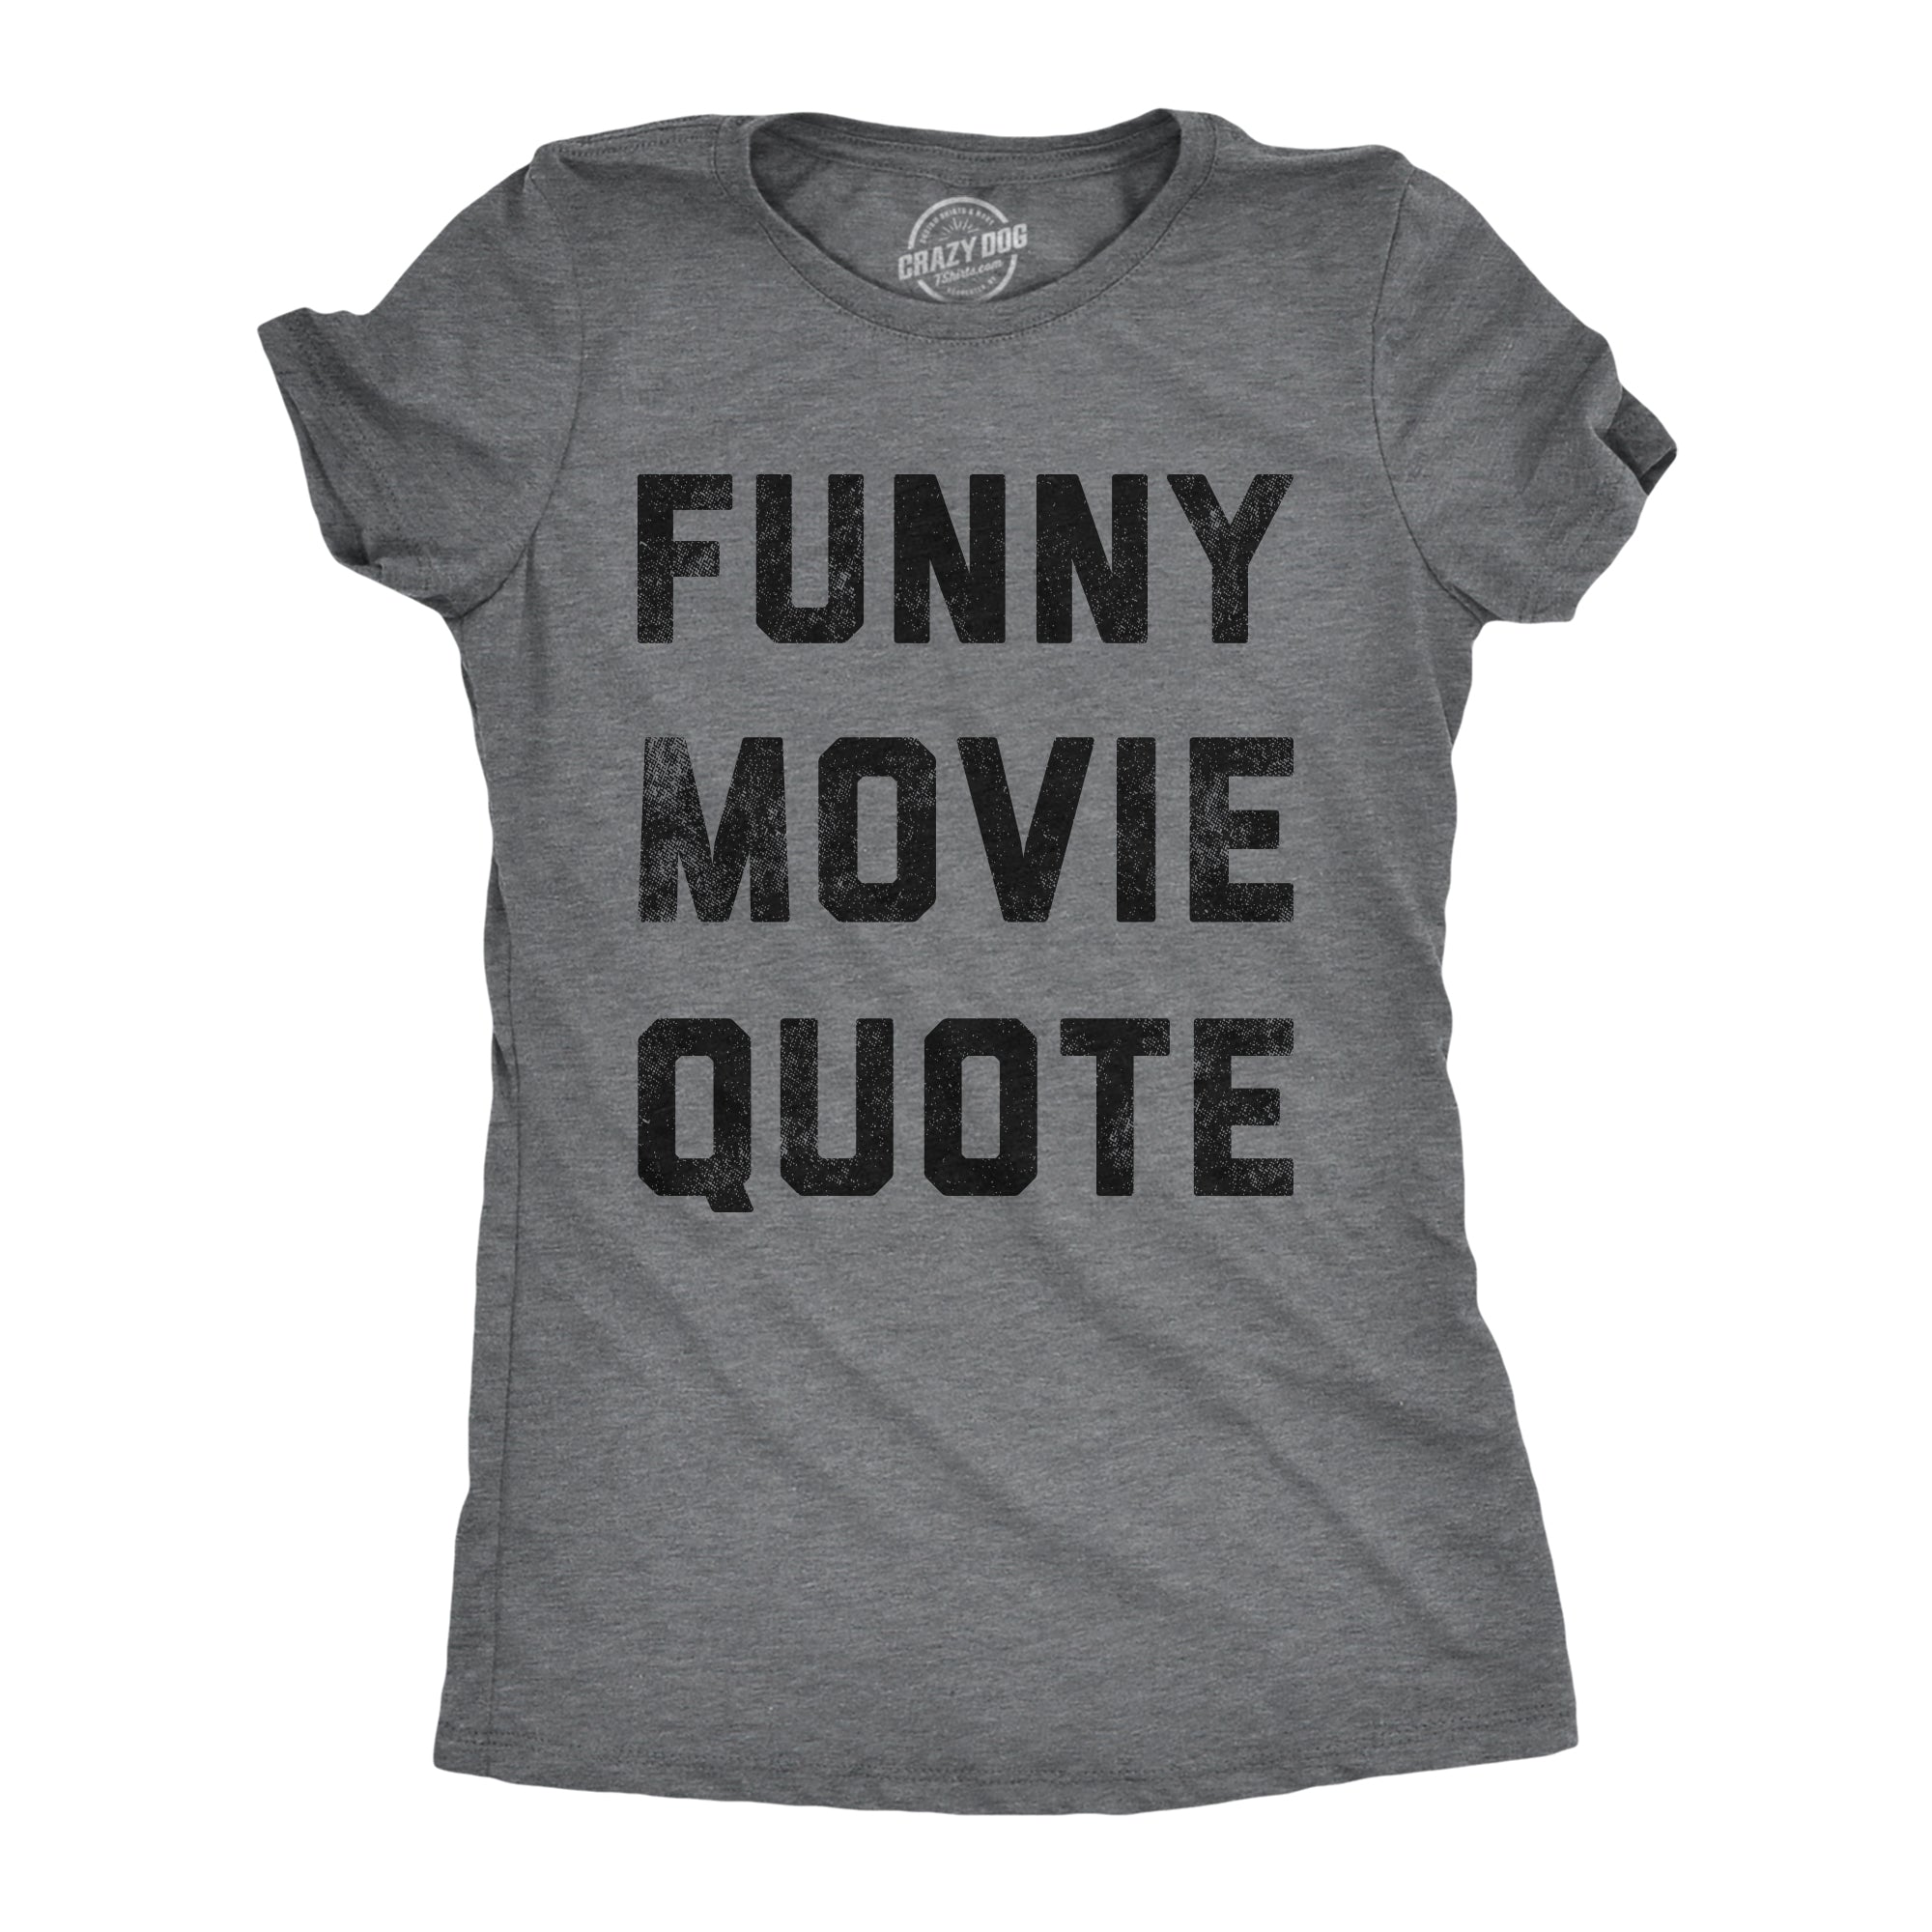 Funny Dark Heather Grey - Funny Movie Quote Funny Movie Quote Womens T Shirt Nerdy TV & Movies sarcastic Tee